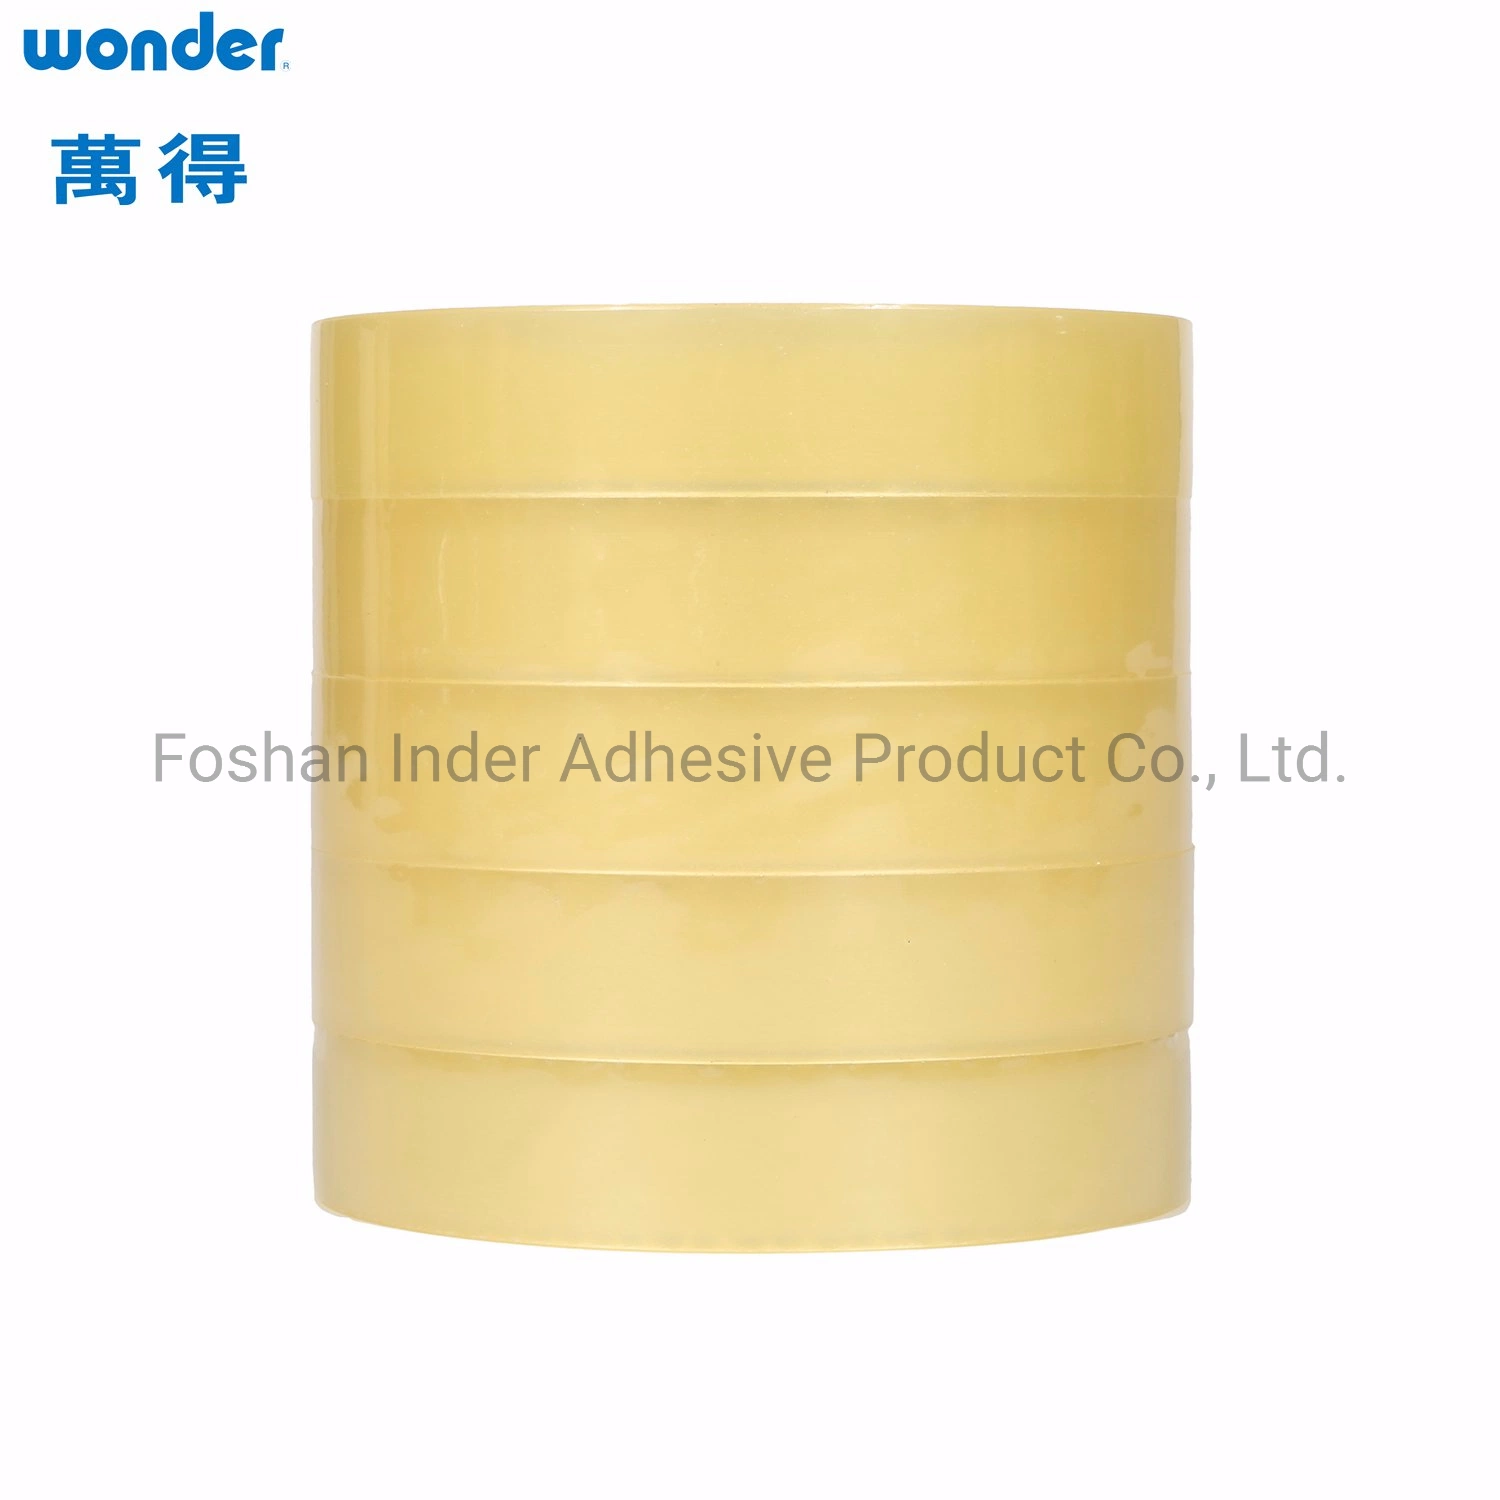 Width 24mm OPP Stationery Tape with Wonder Brand and High quality/High cost performance 